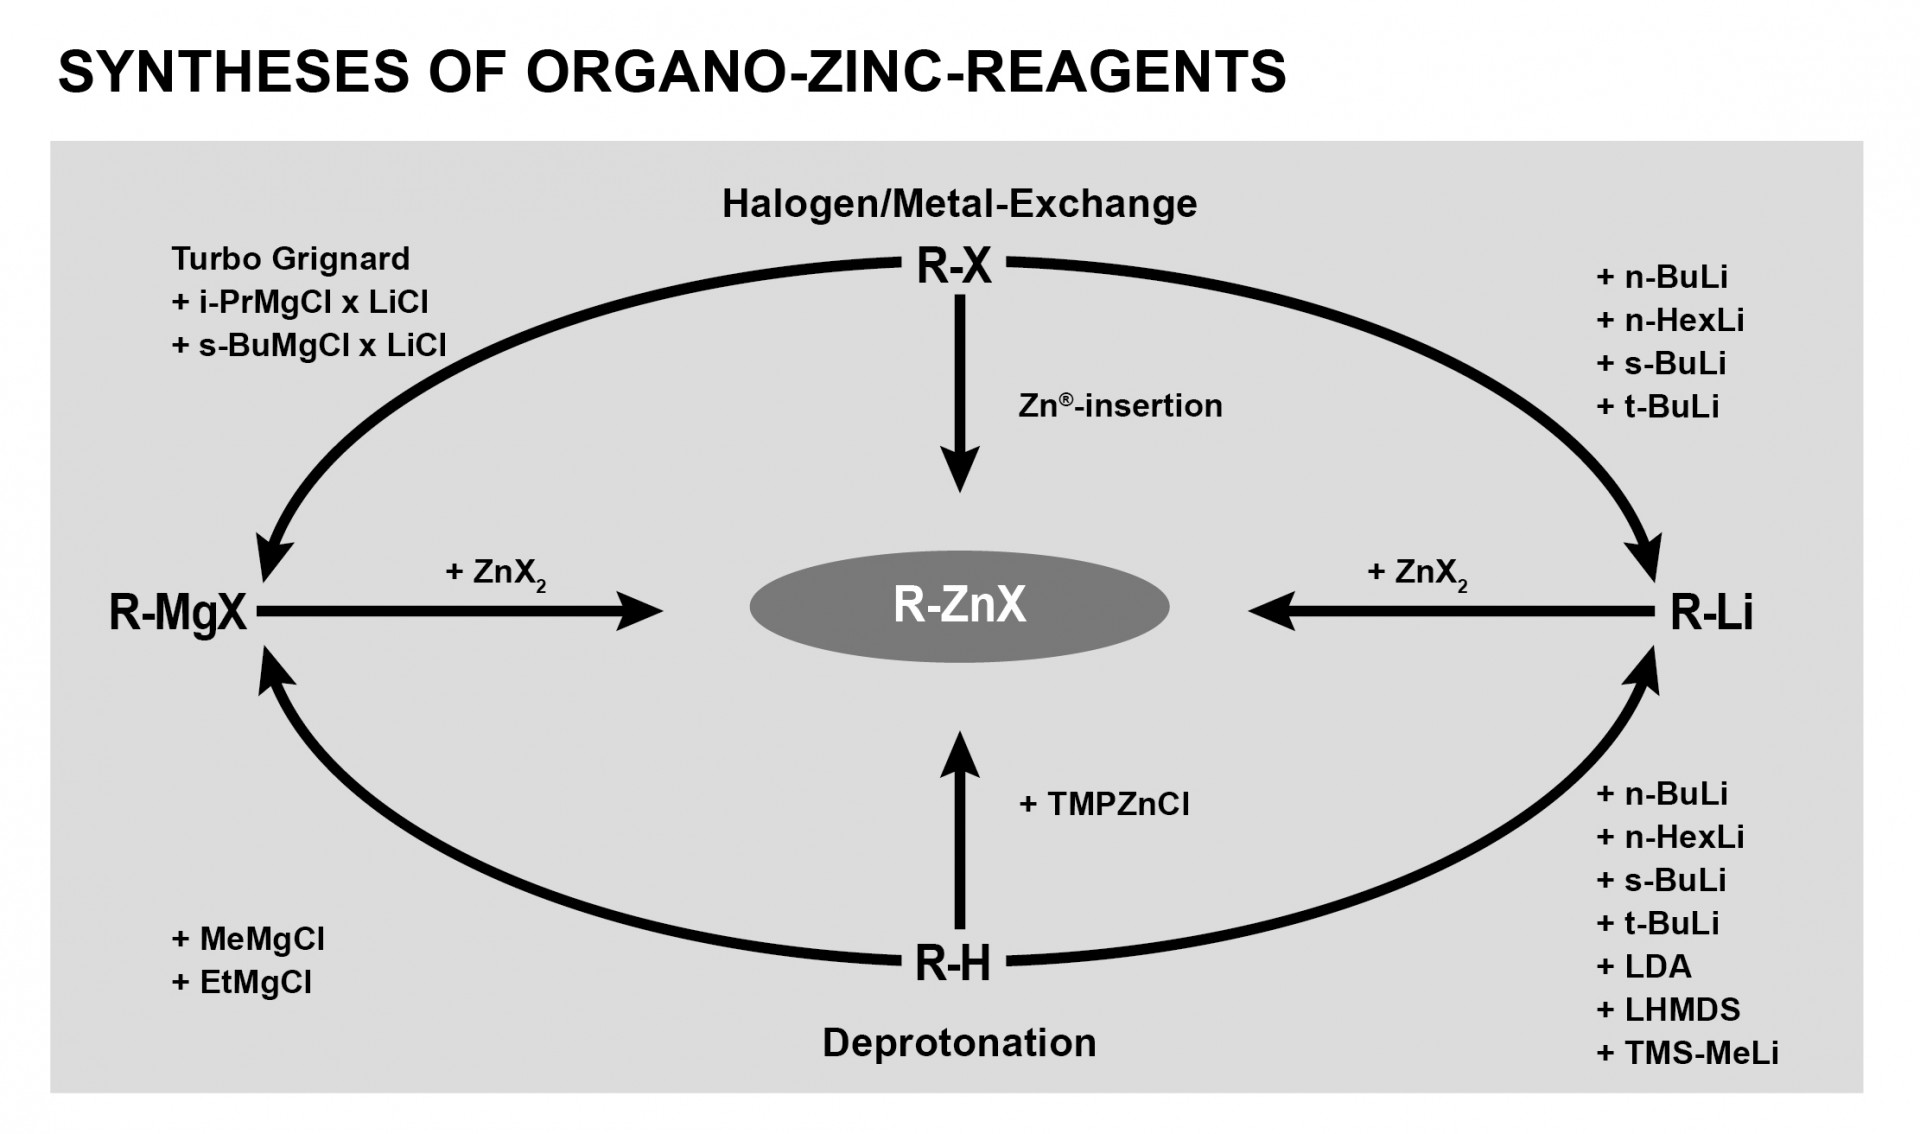 Synthese of Organo-Zinc-Reagents